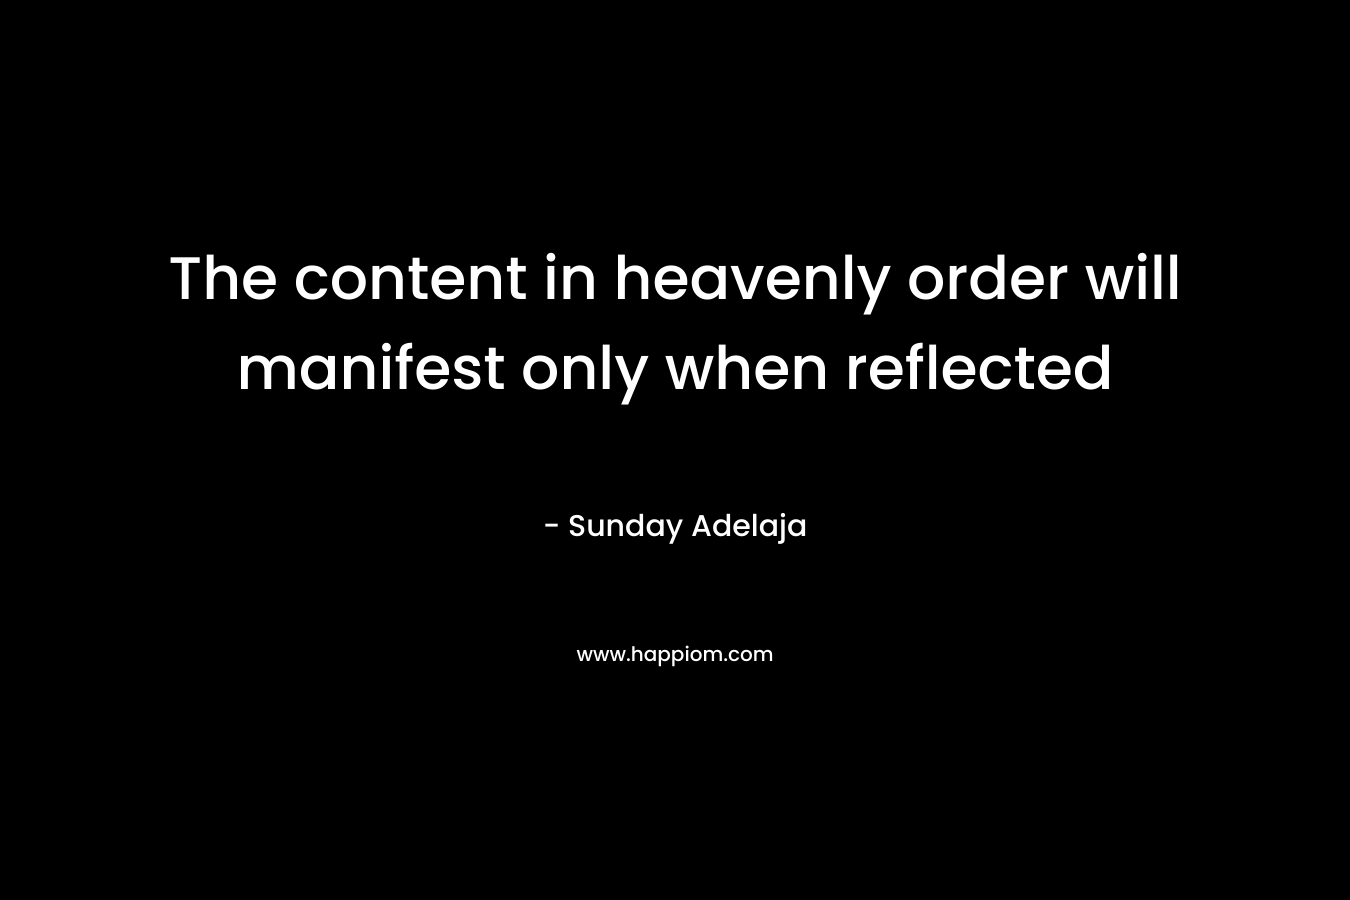 The content in heavenly order will manifest only when reflected